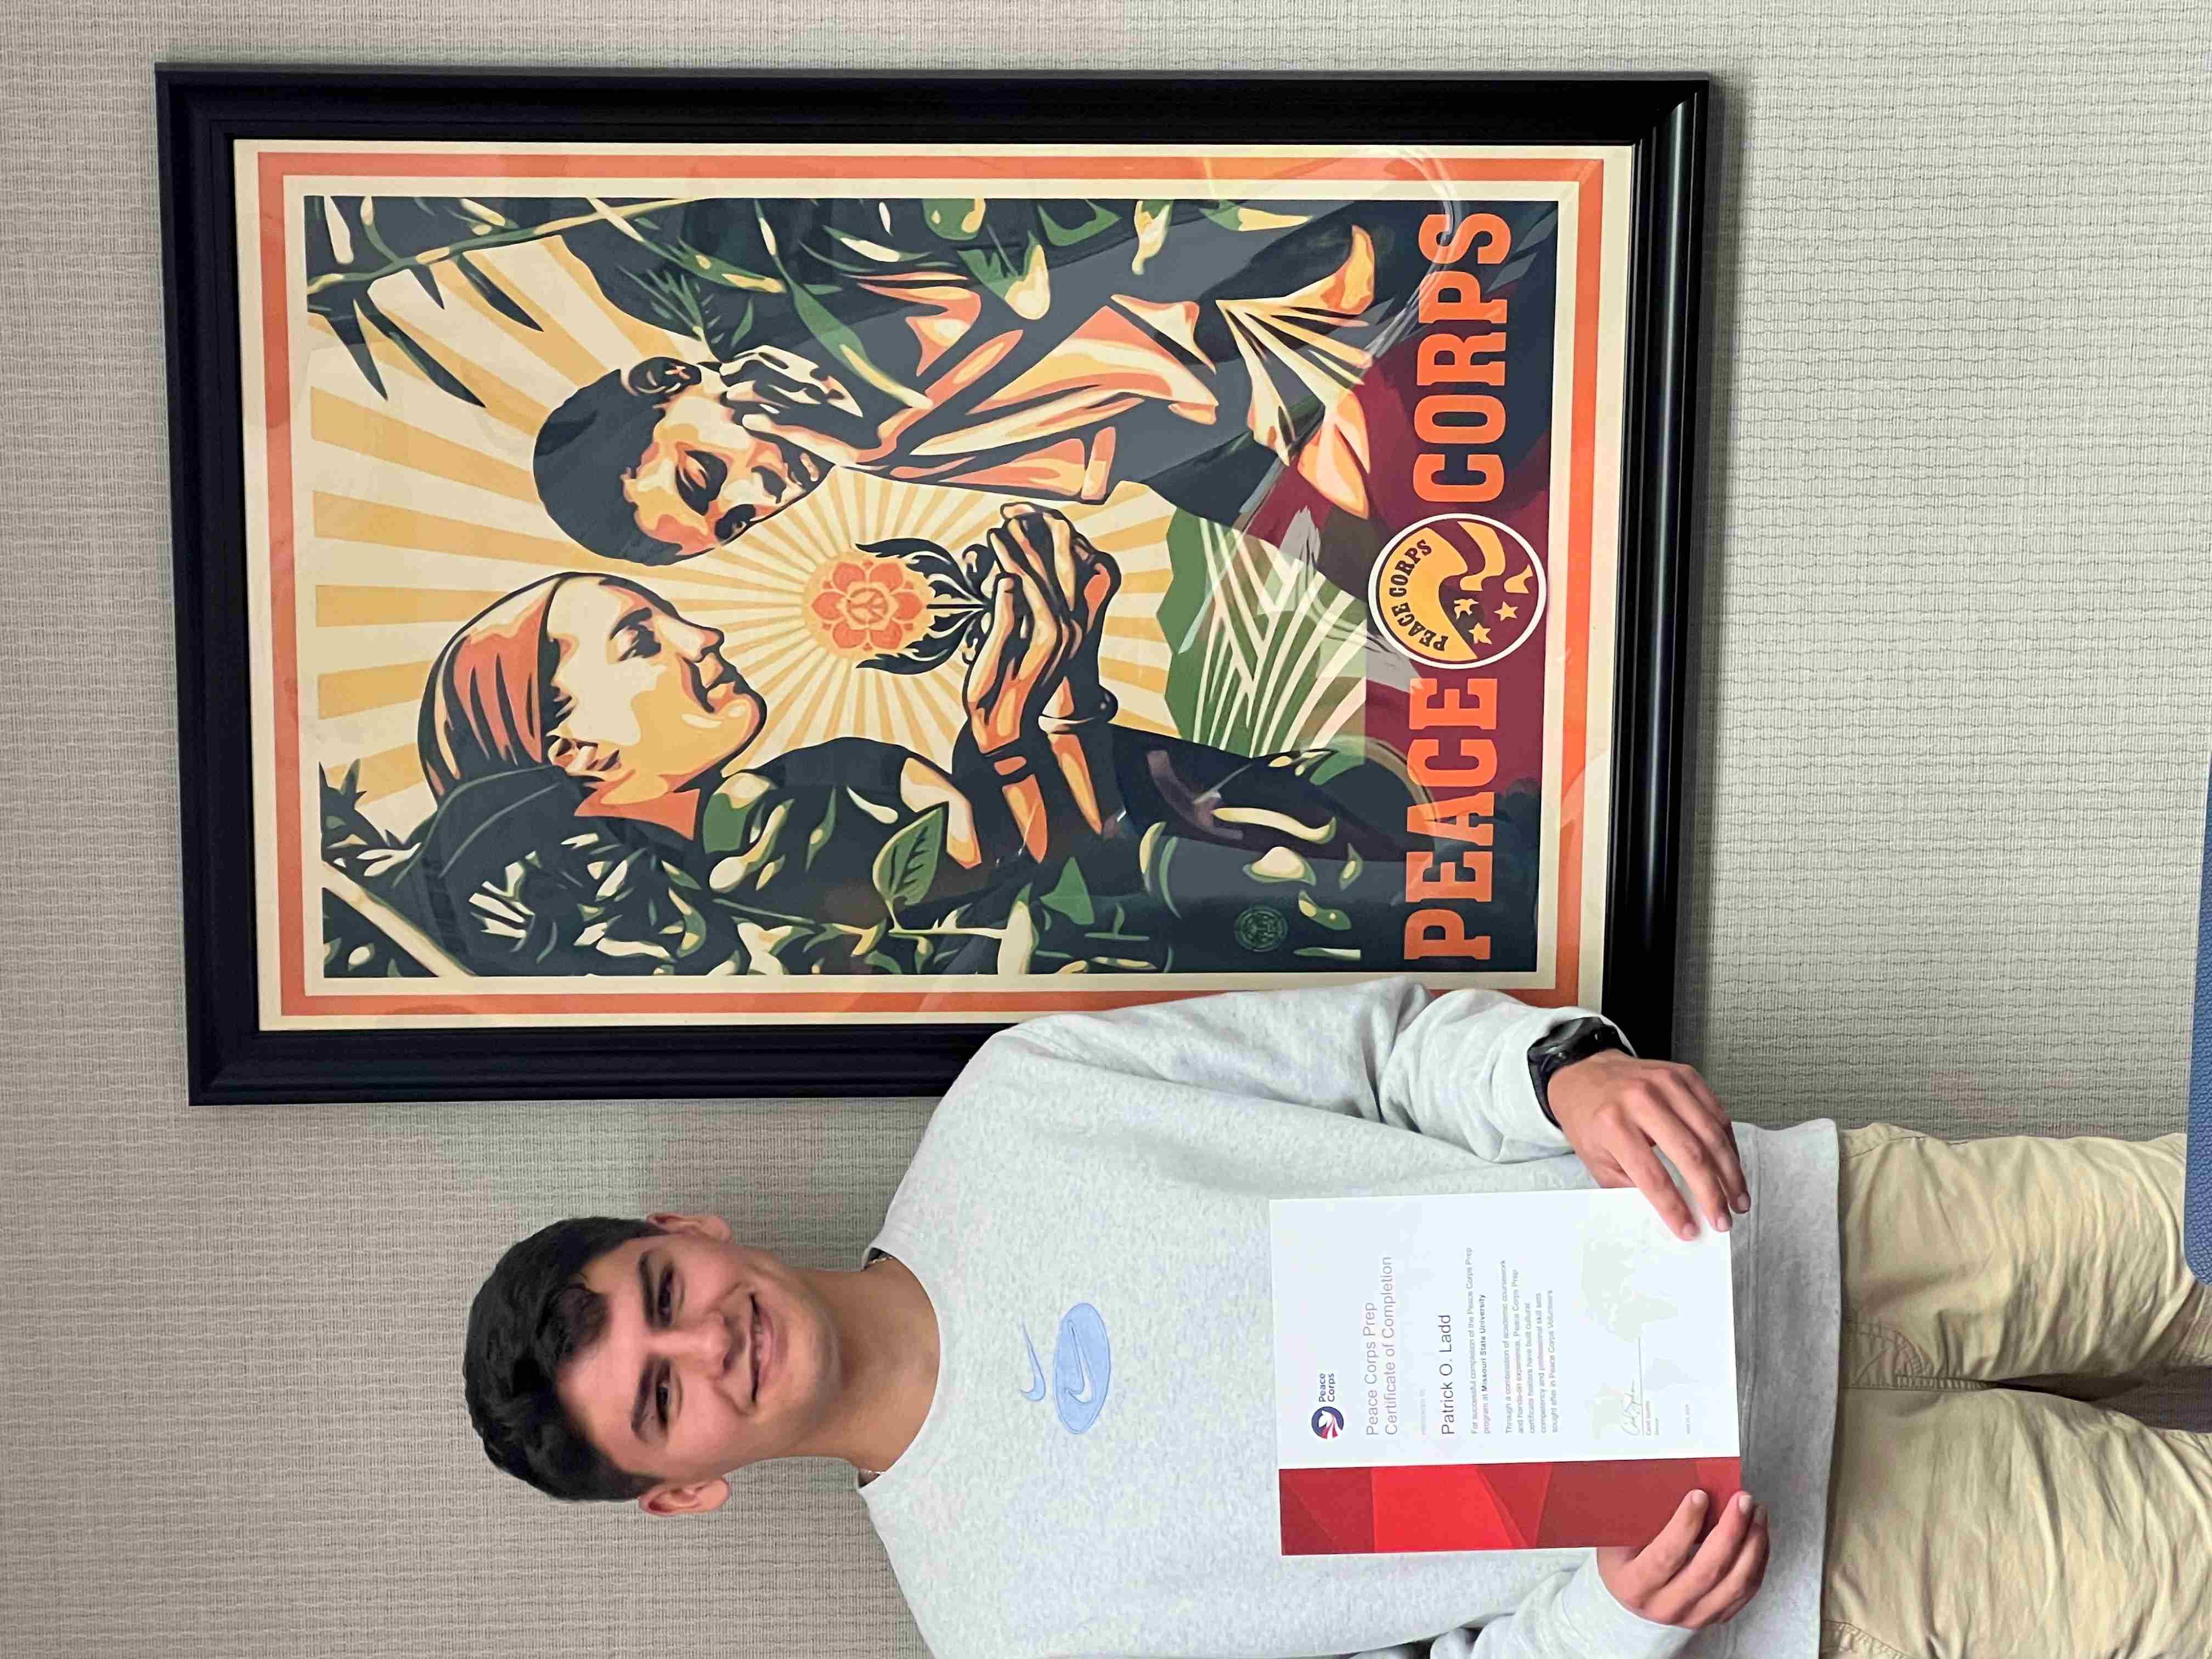 Student holding a certificate stands in front of a Peace Corps poster